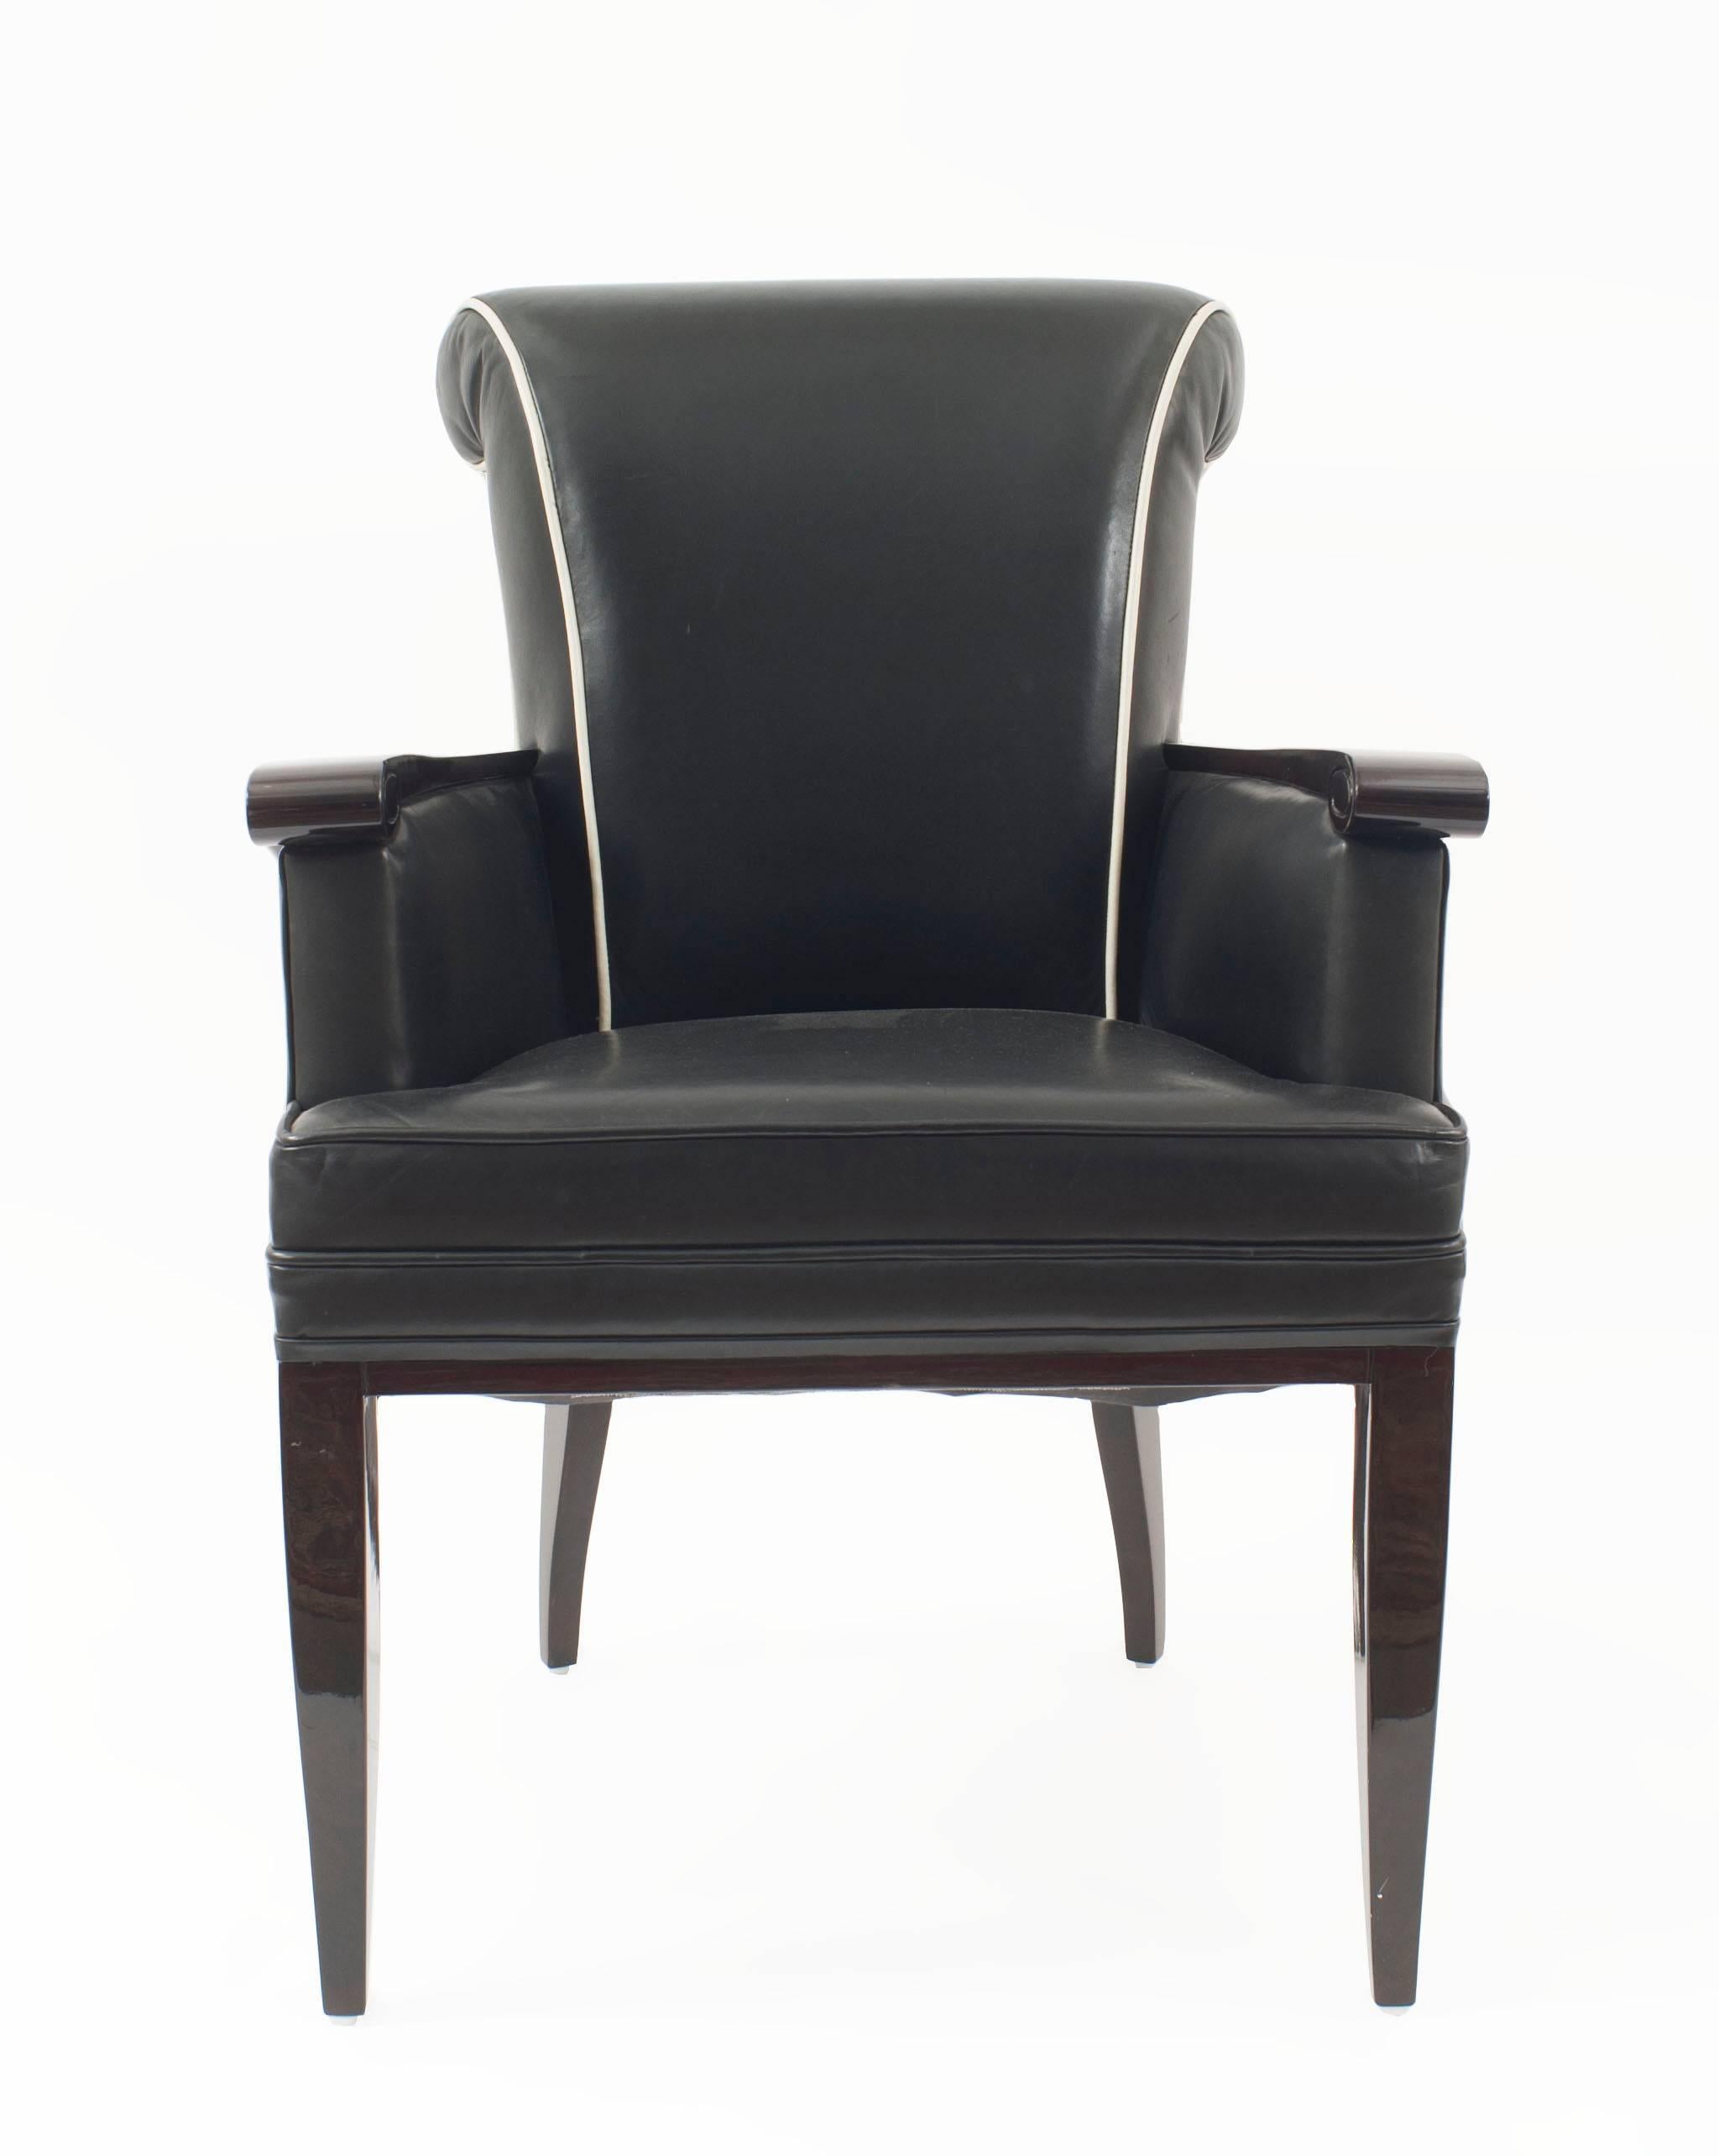 Pair of French Mid-Century dark rosewood stained oak bergere Armchairs with a rolled back and and carved scroll arm upholstered in black leather with white piping (by JEAN PASCAUD) (PRICED AS Pair)
